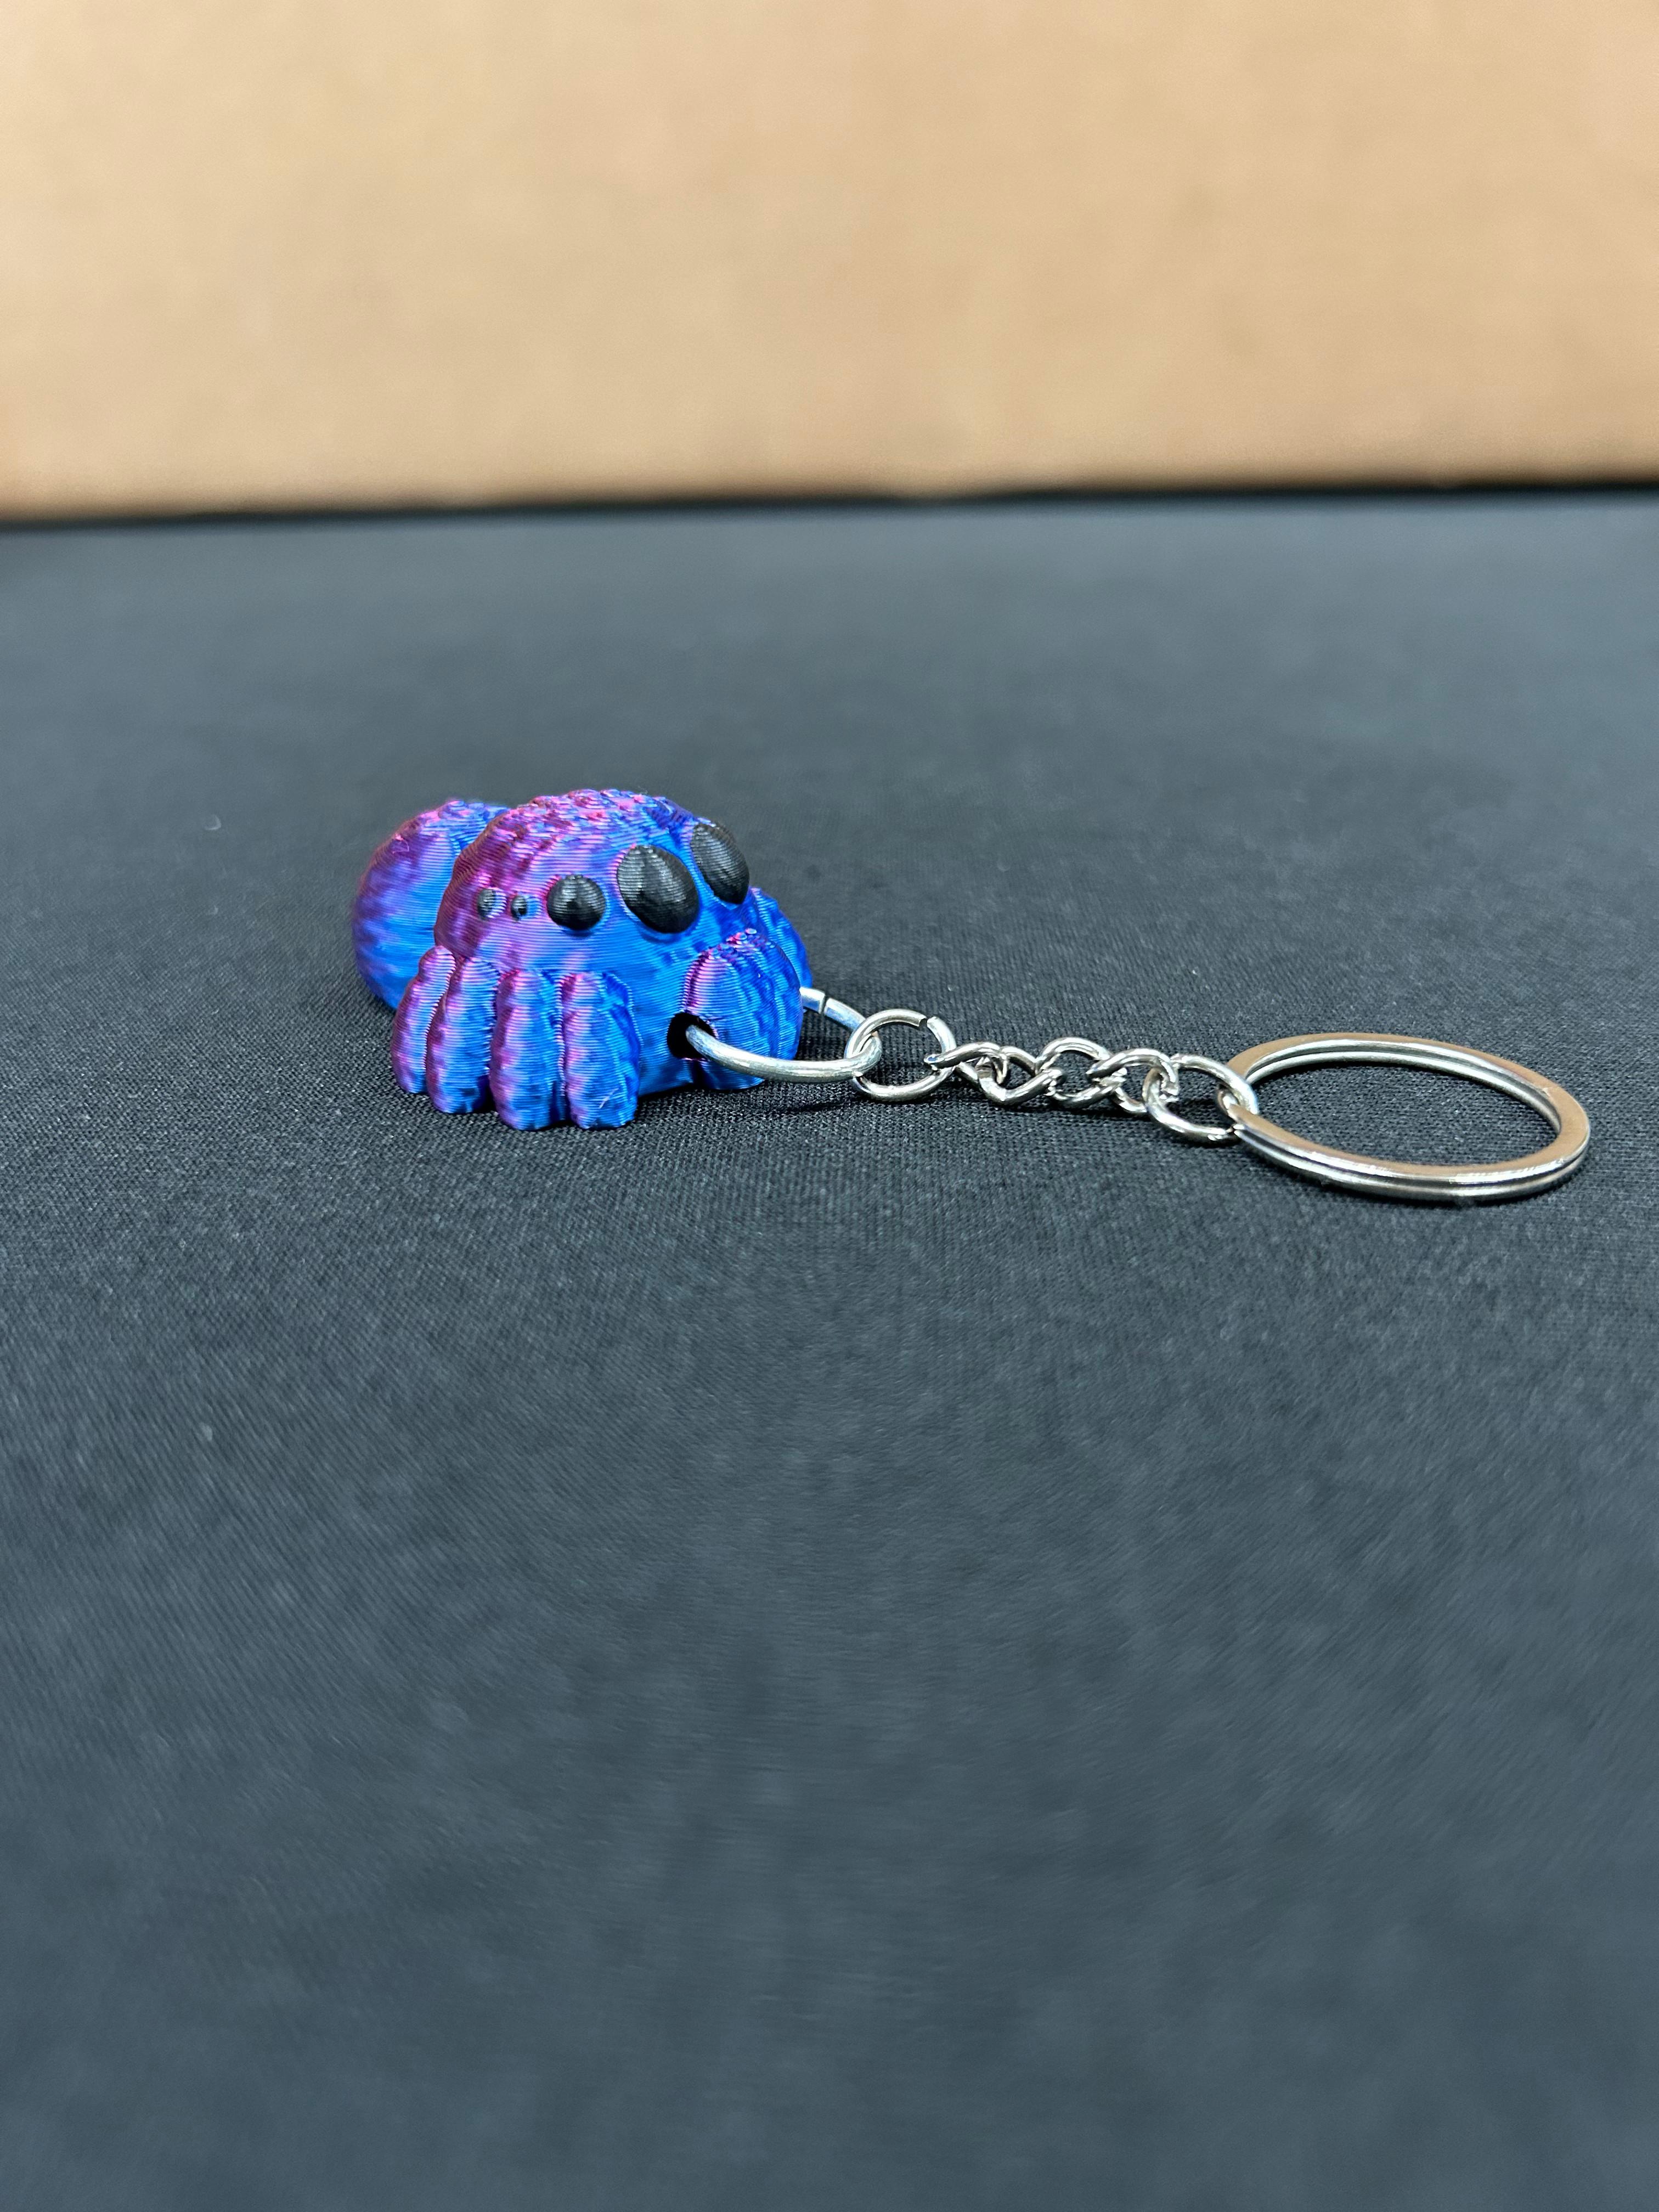 Hairy Spider Keychain Front 3d model